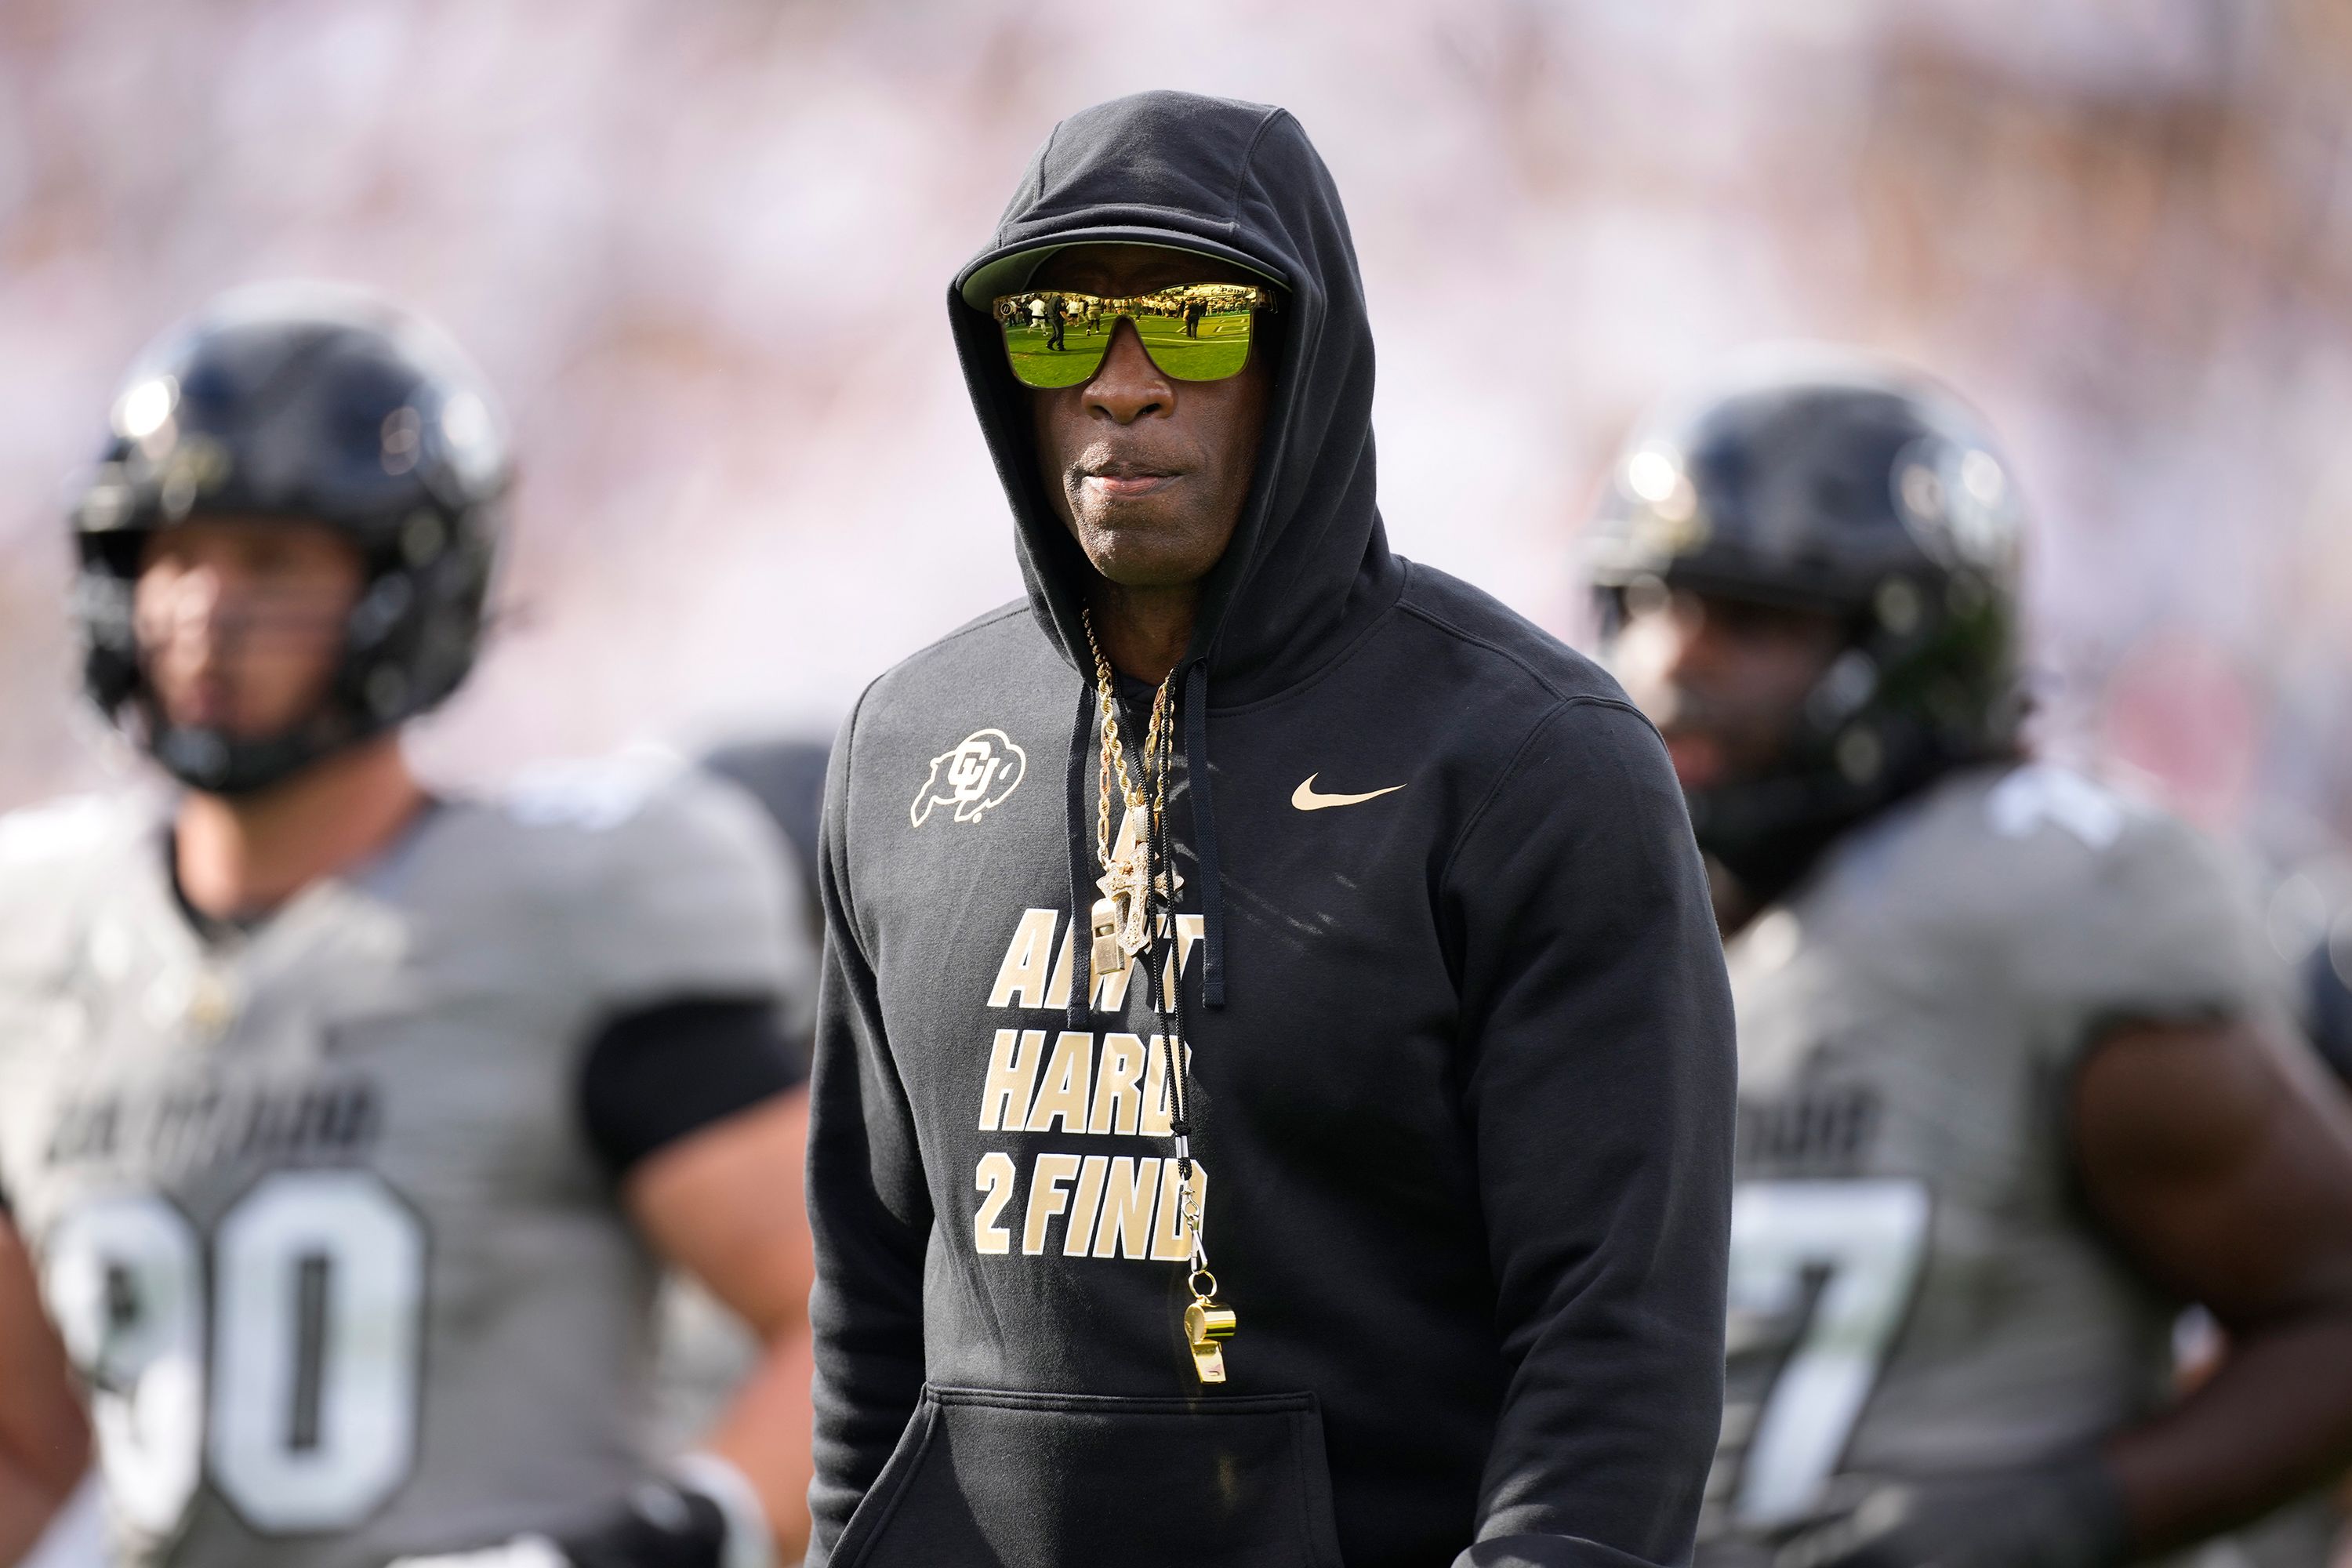 Deion Sanders' Colorado falls to their first defeat of the season